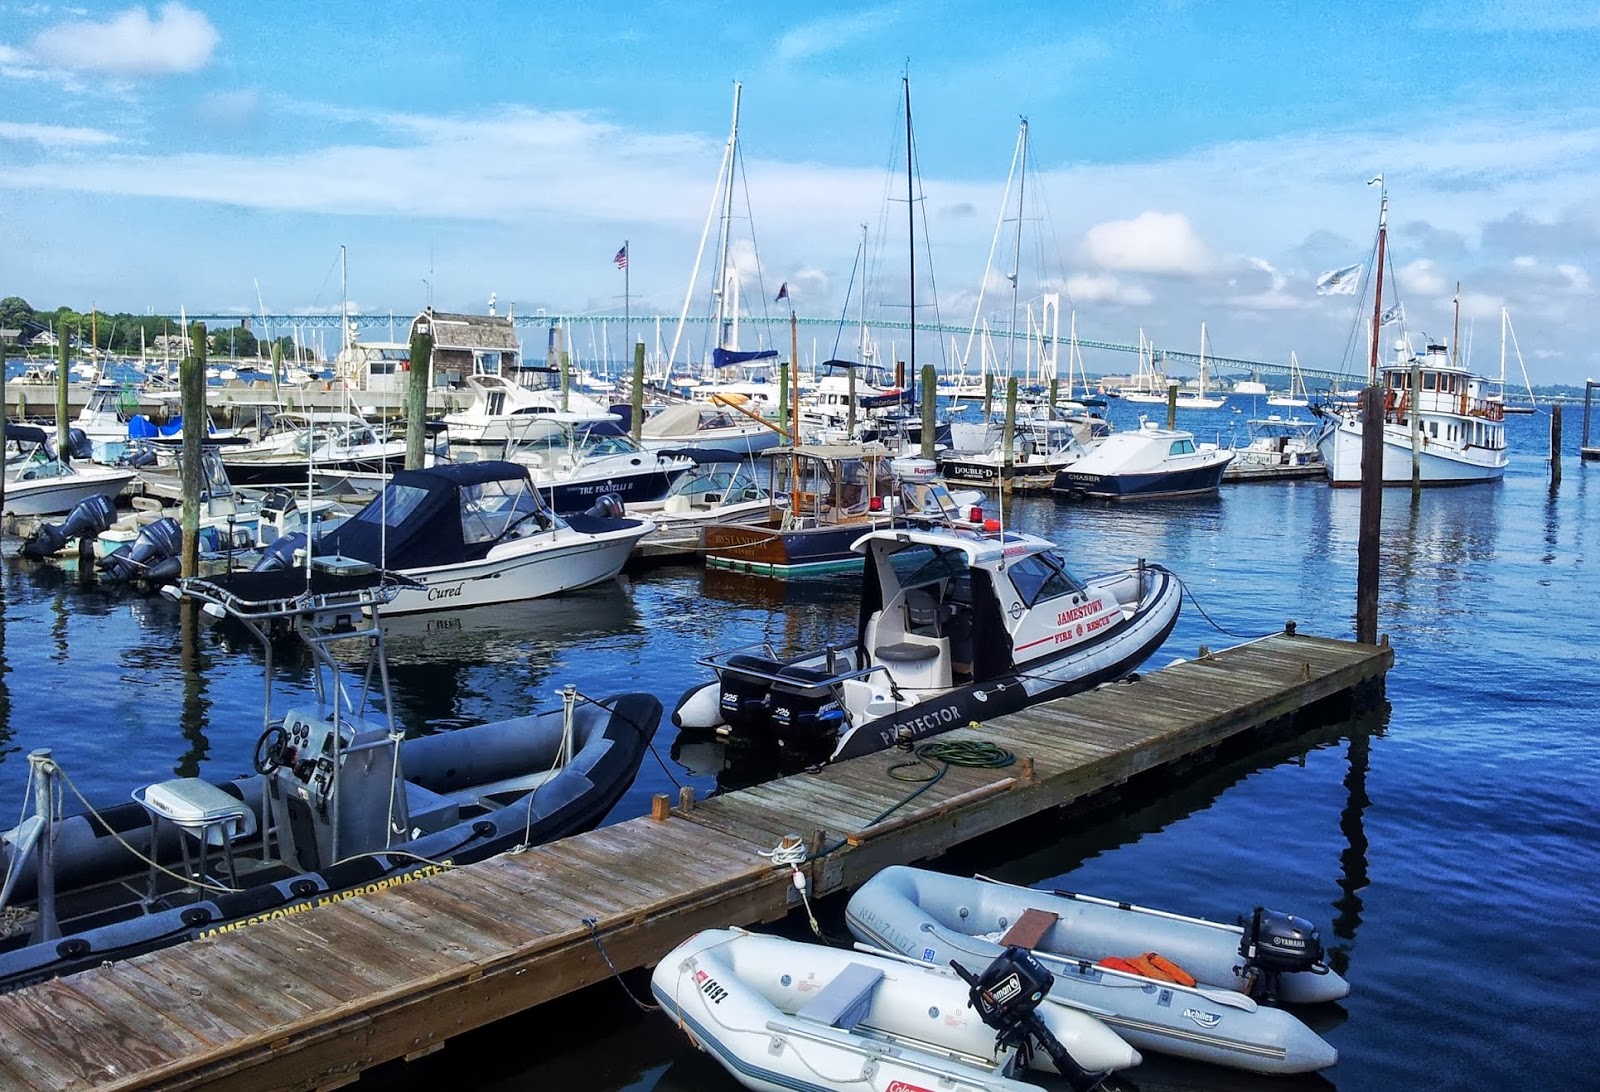 Conanicut is one of the most visited harbor towns on the East Coast.